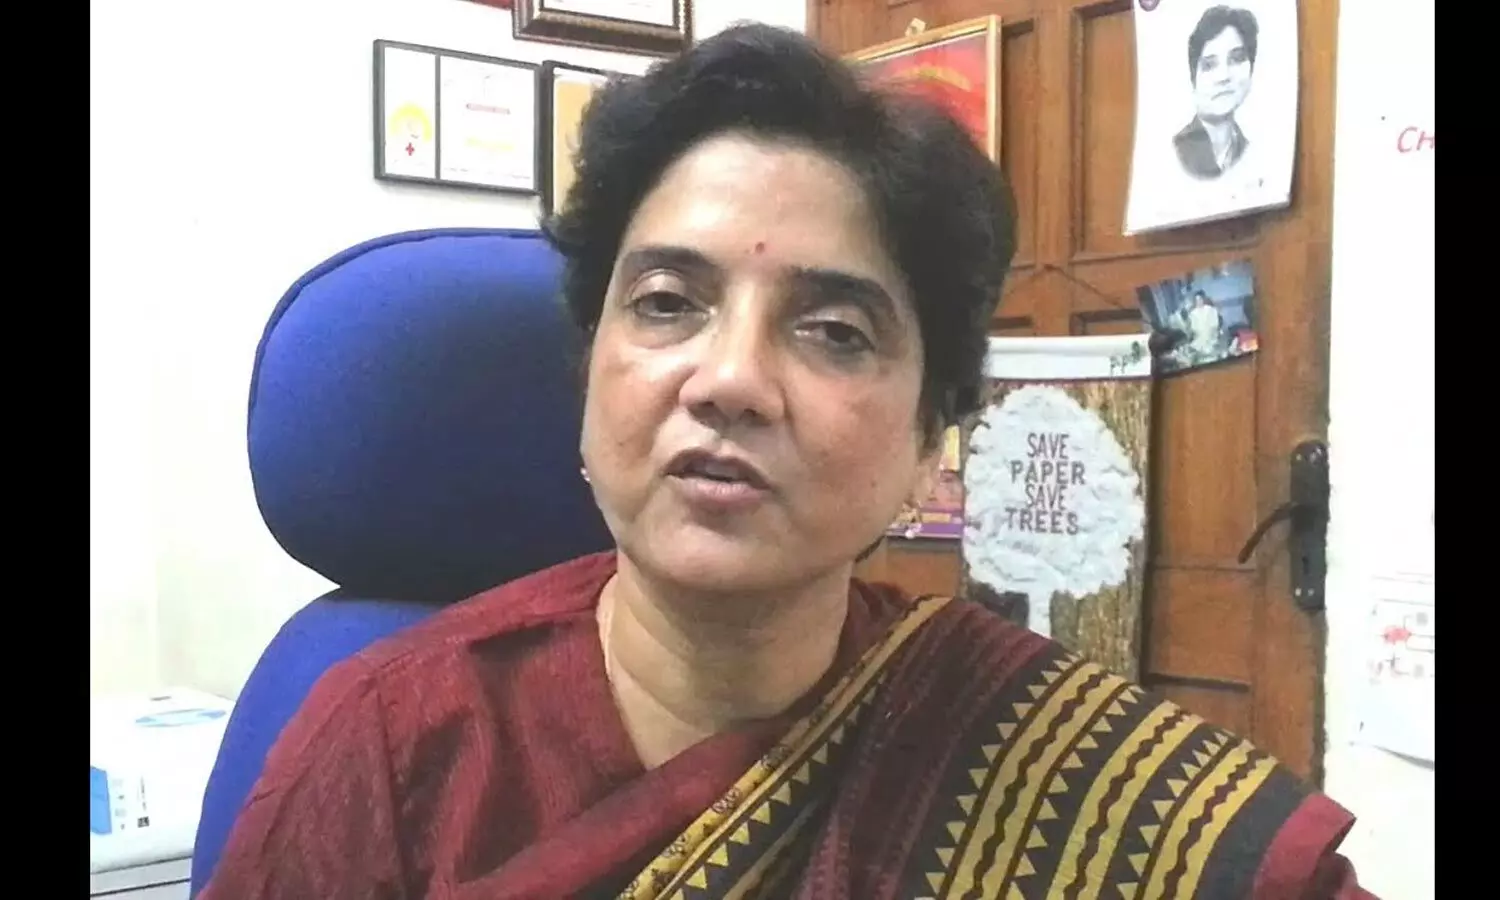 Video made during sting op to disturb peace, says GSVM principal who made derogatory comments